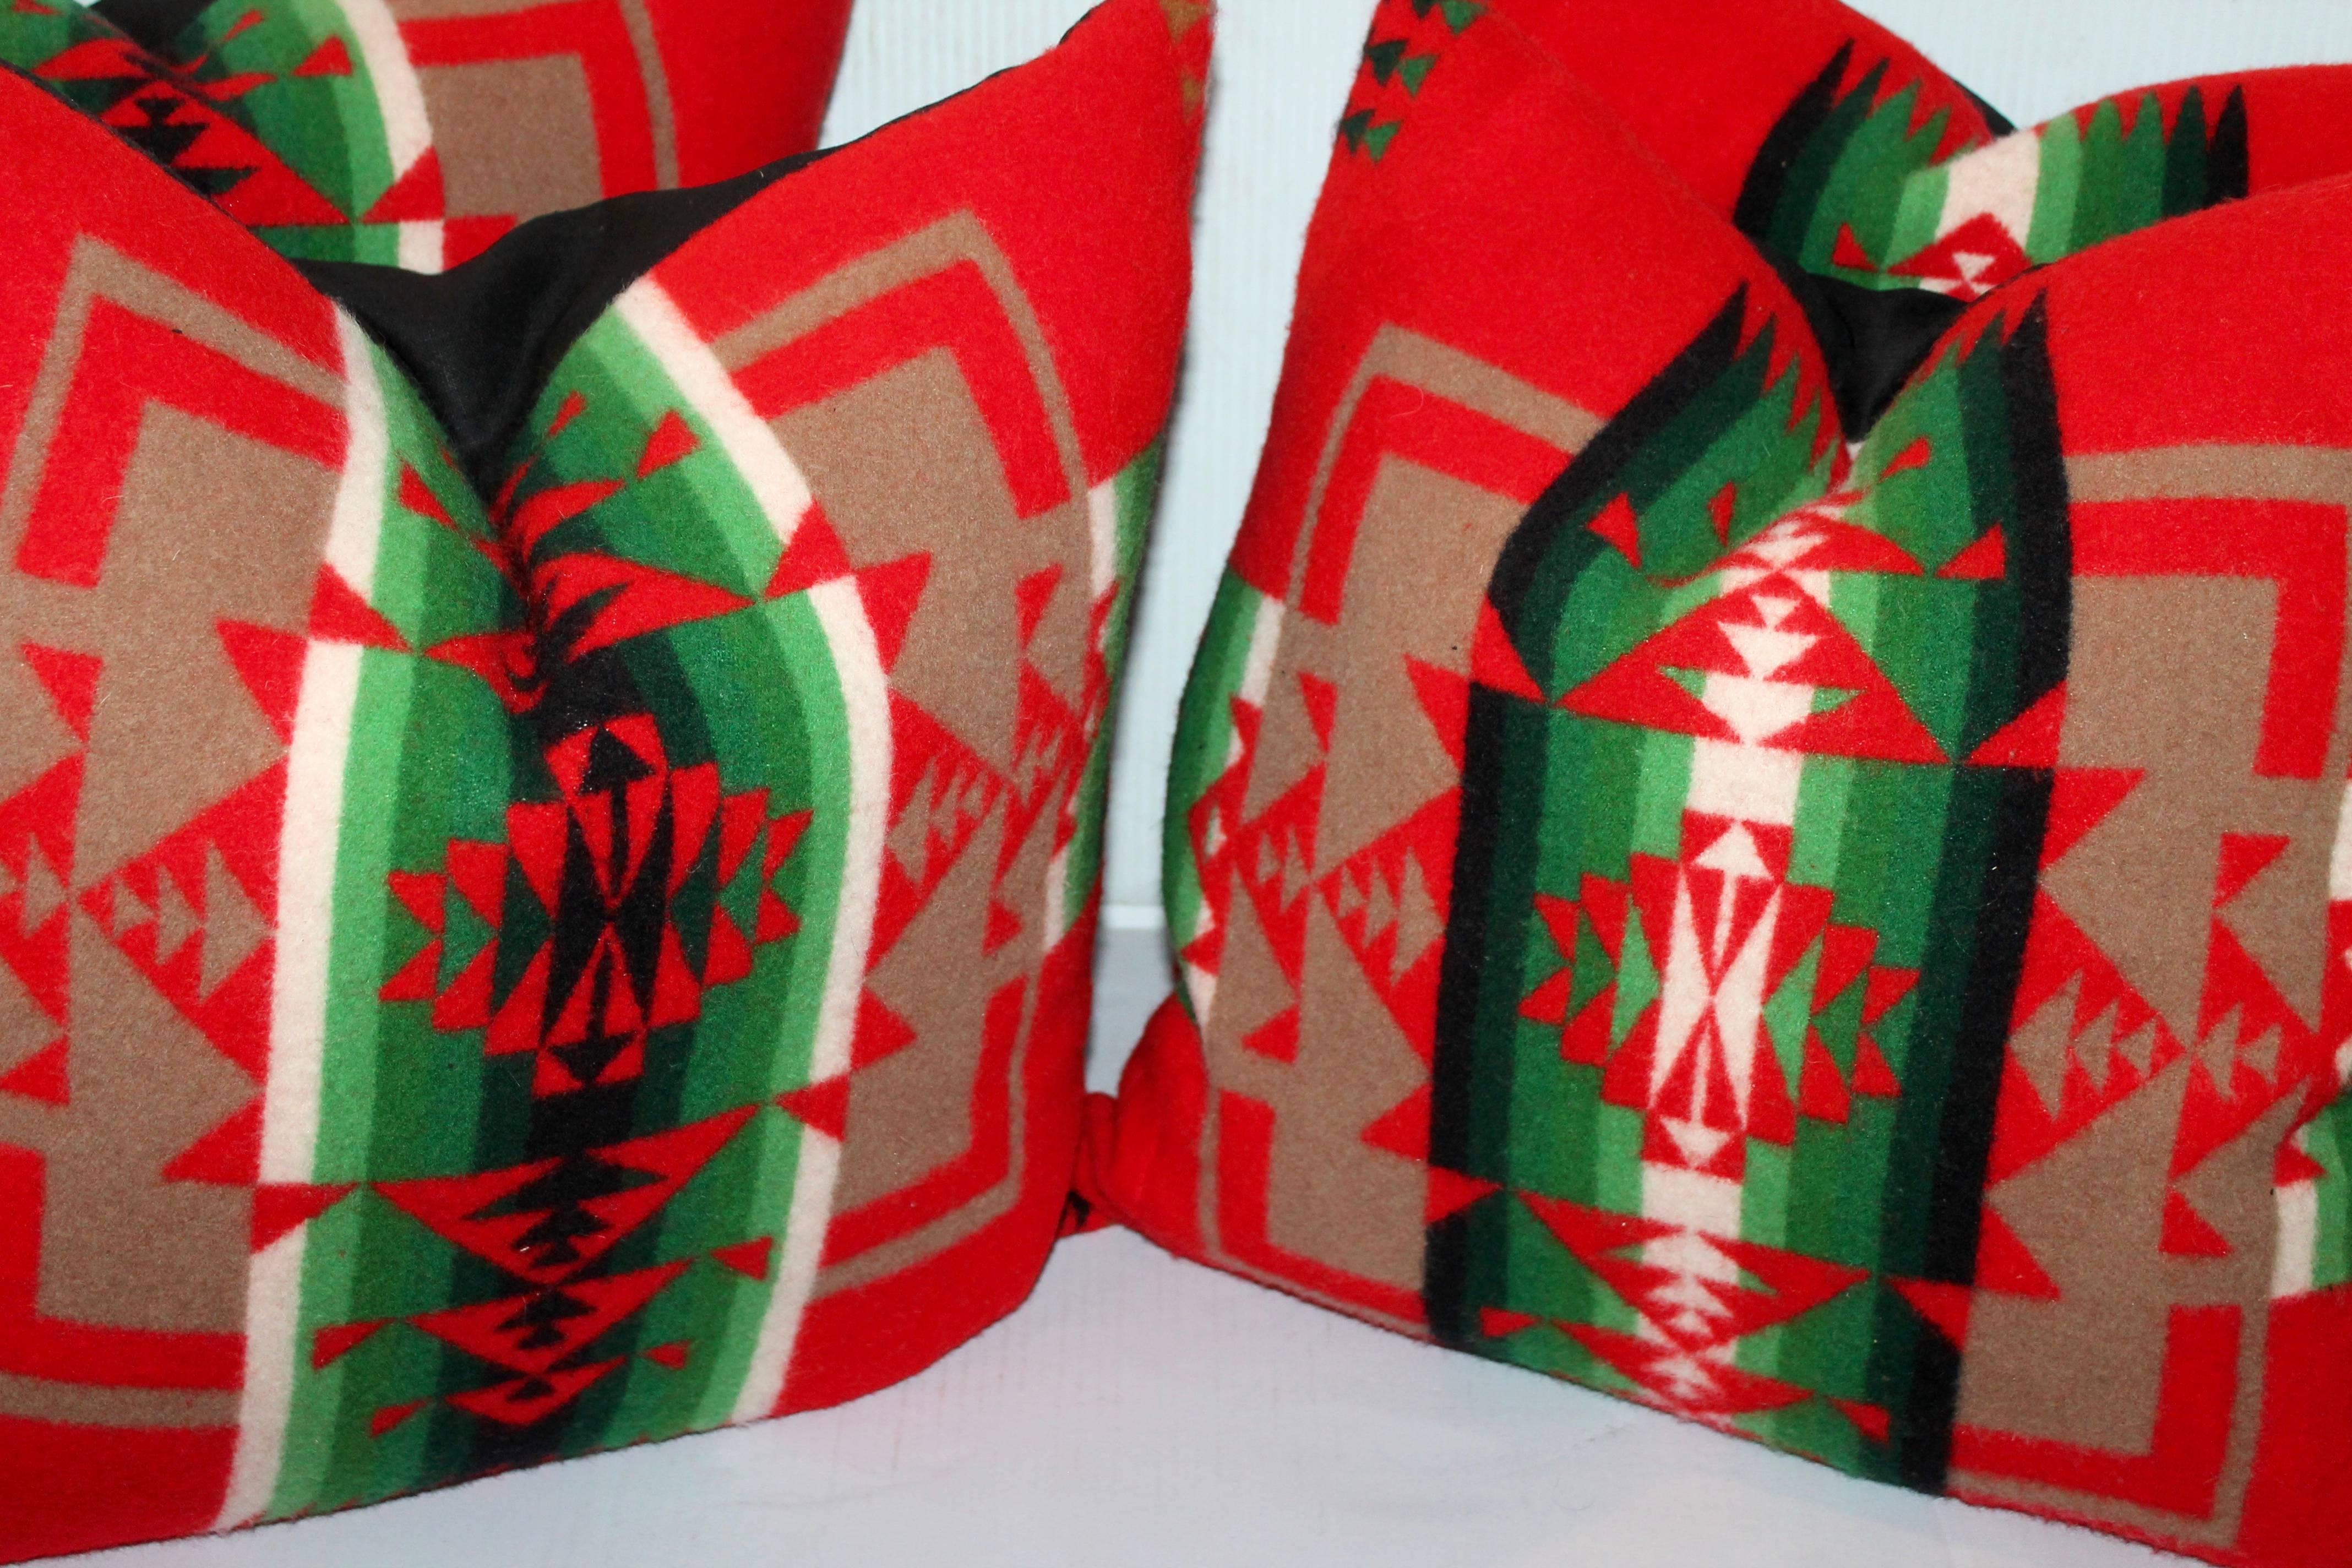 These amazing and graphic Indian camp blanket pillows are sold in pairs. The backing is a black cotton linen backing. They are made from a vintage blanket.